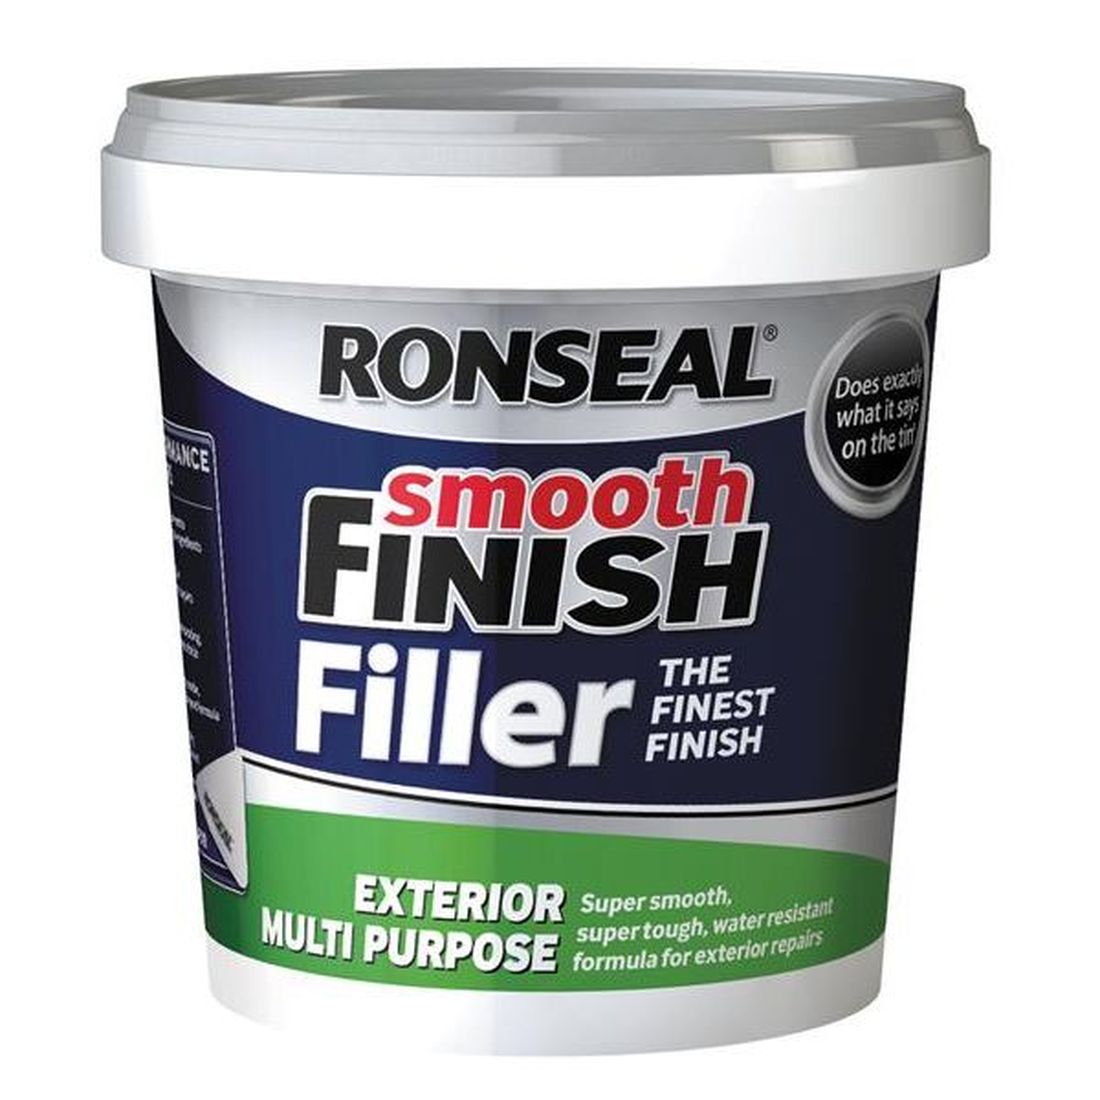 Ronseal Smooth Finish Exterior Multipurpose Ready Mix Filler Tub 1.2kg                  